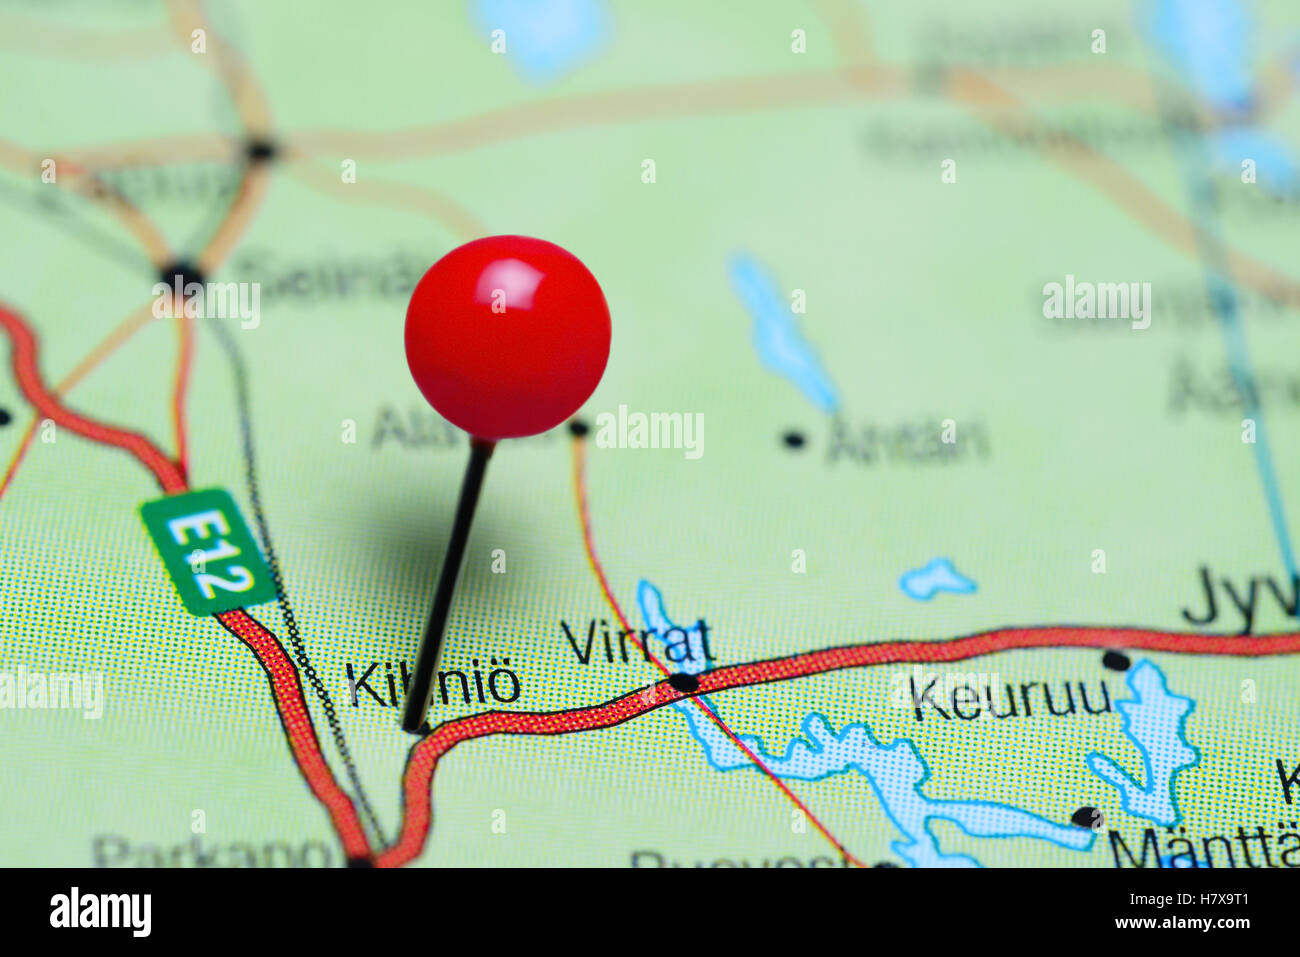 Kihnio pinned on a map of Finland Stock Photo